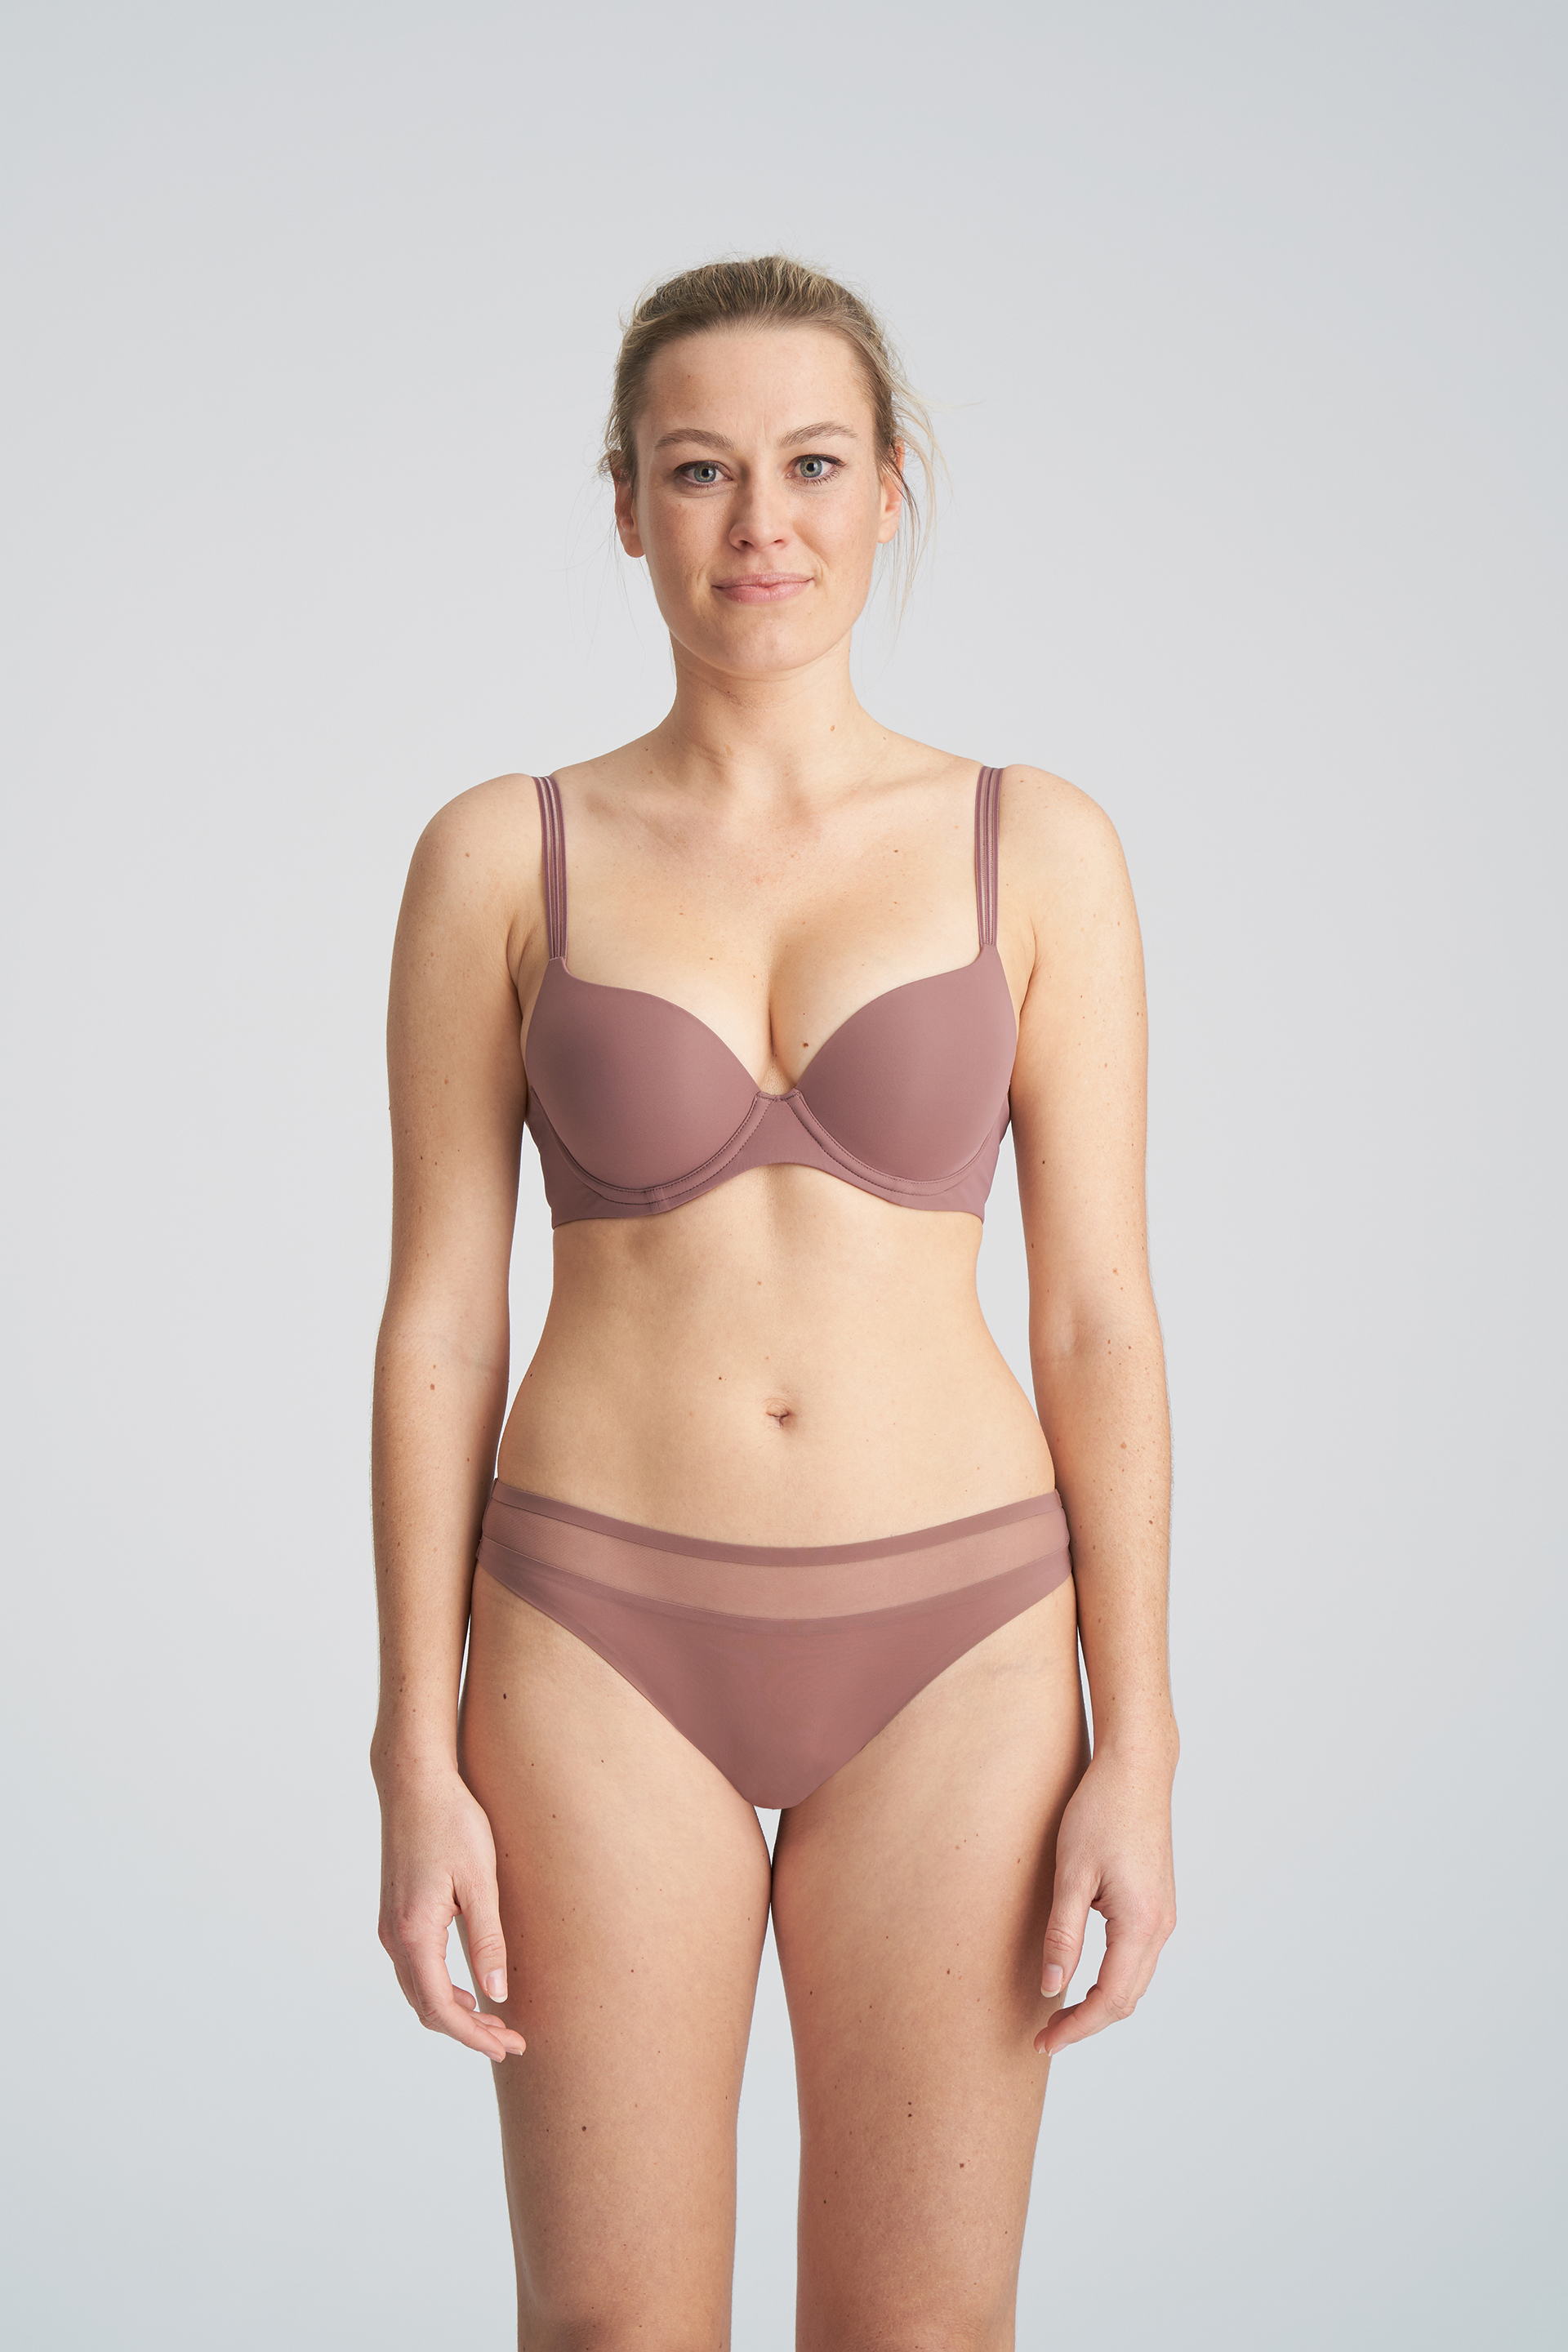 Marie Jo Louie Full Cup Bra Wireless SATIN TAUPE buy for the best price  CAD$ 142.00 - Canada and U.S. delivery – Bralissimo